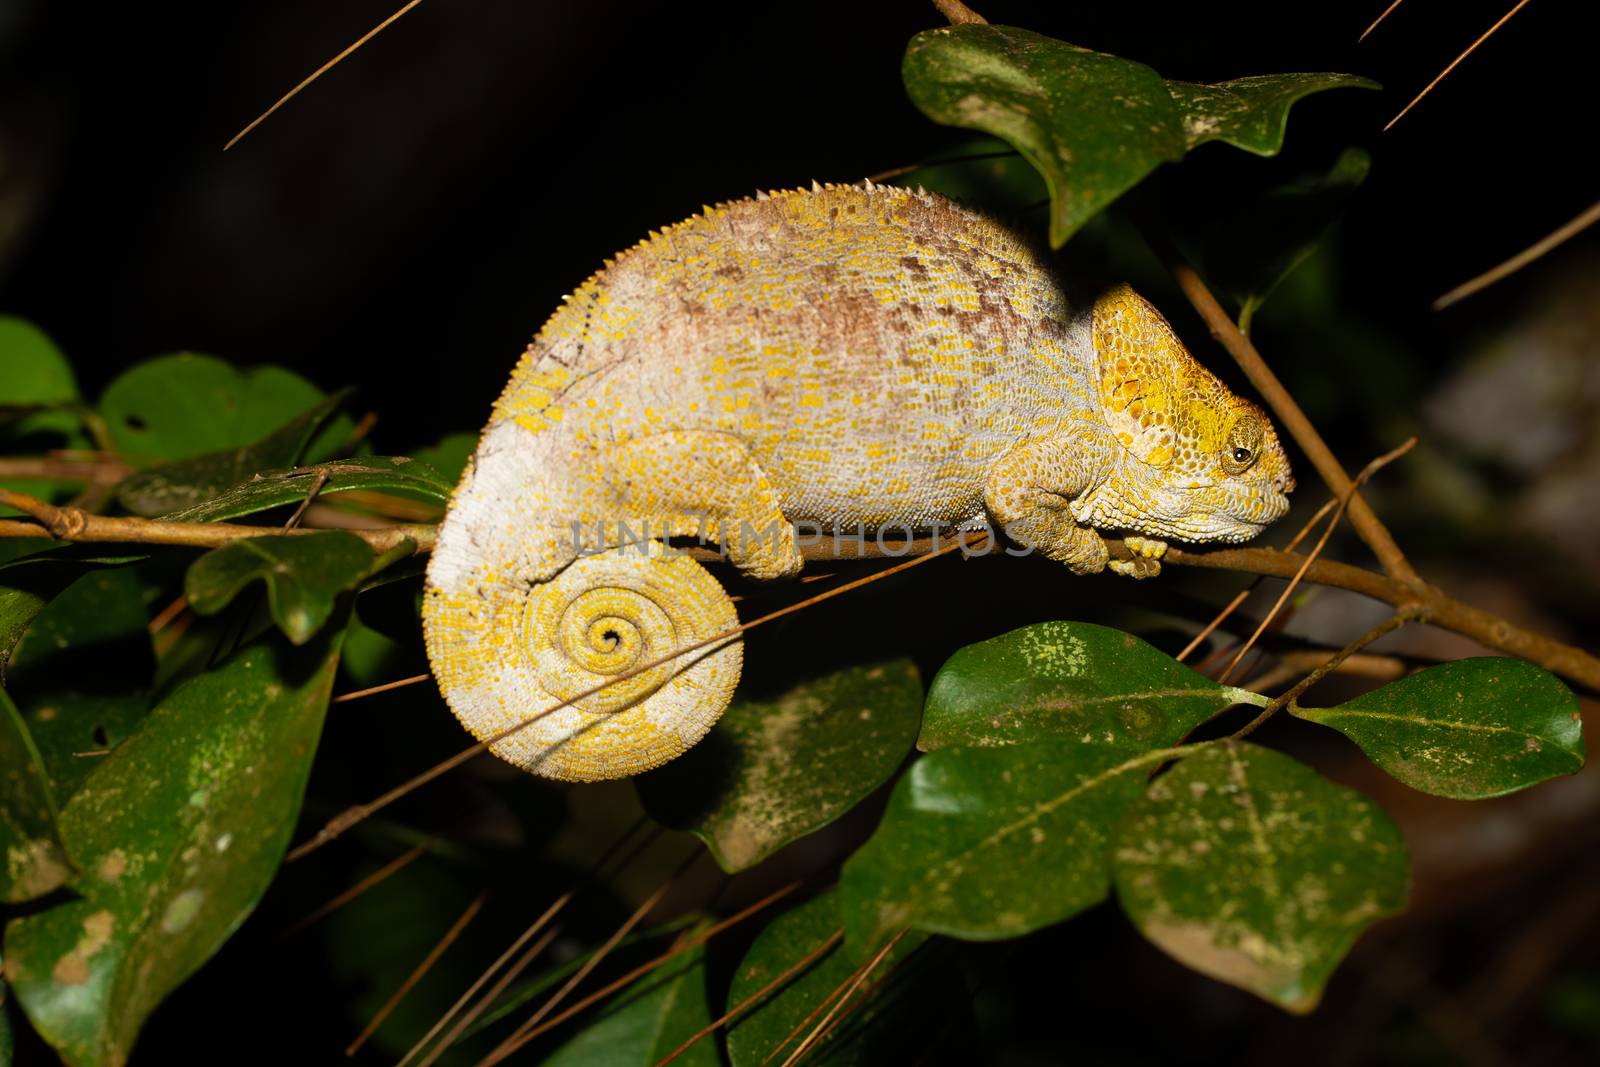 One chameleon on a branch with green leaves